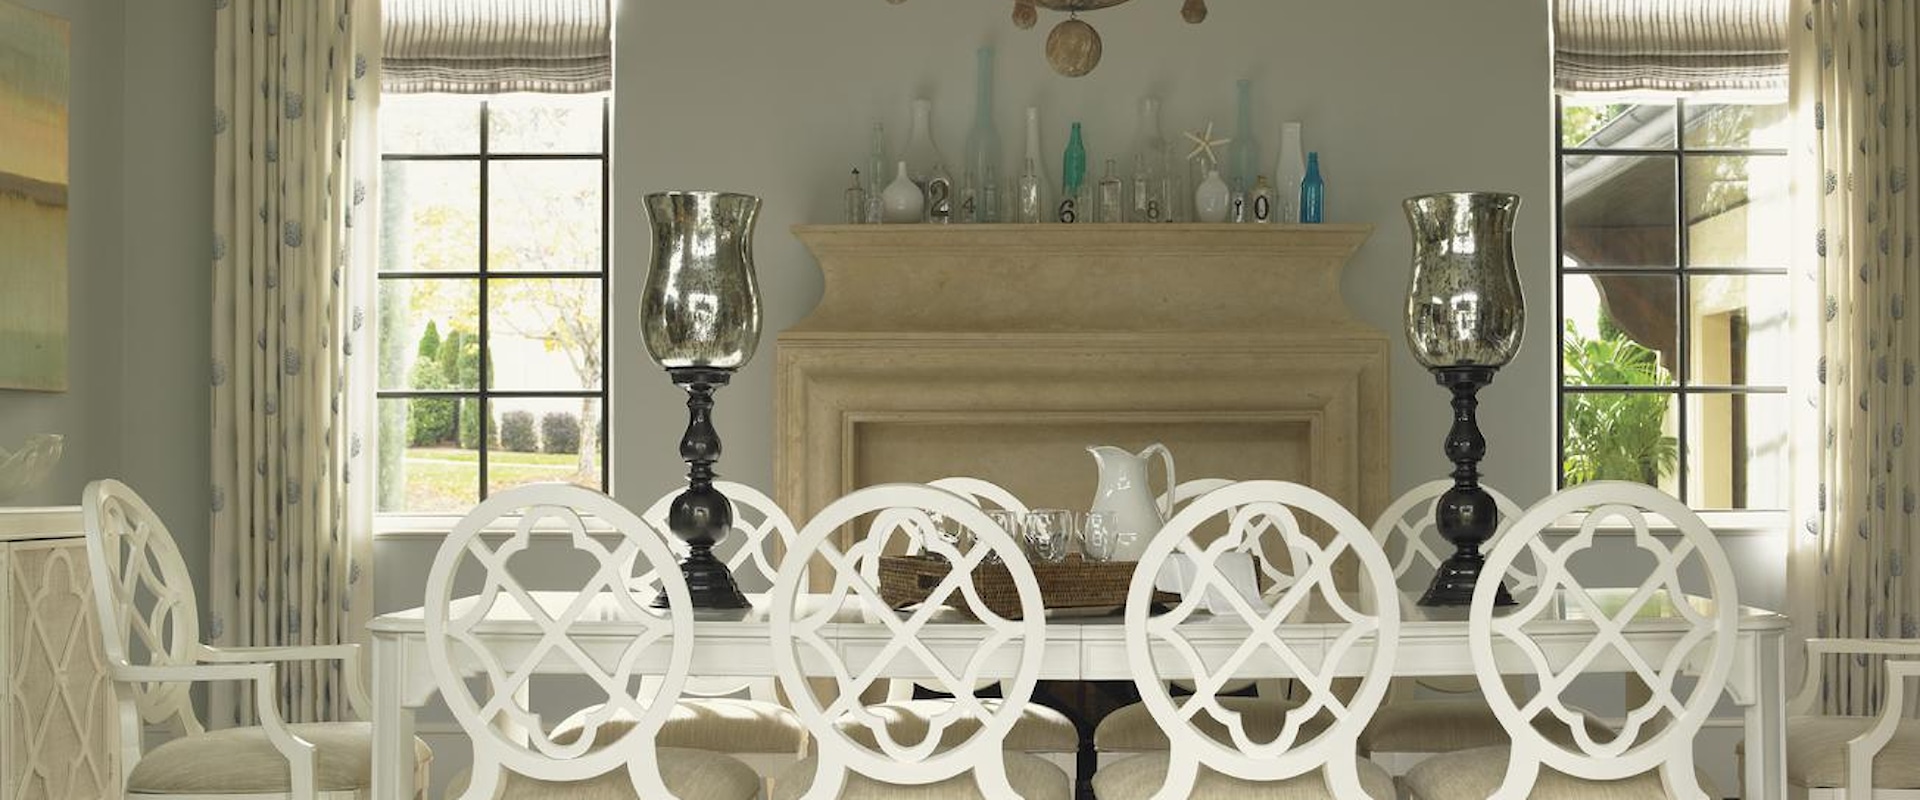 11 Piece Rectangular Castel Harbour Dining Table with Mill Creek Dining Chairs with Quatrefoil Diamond Backs